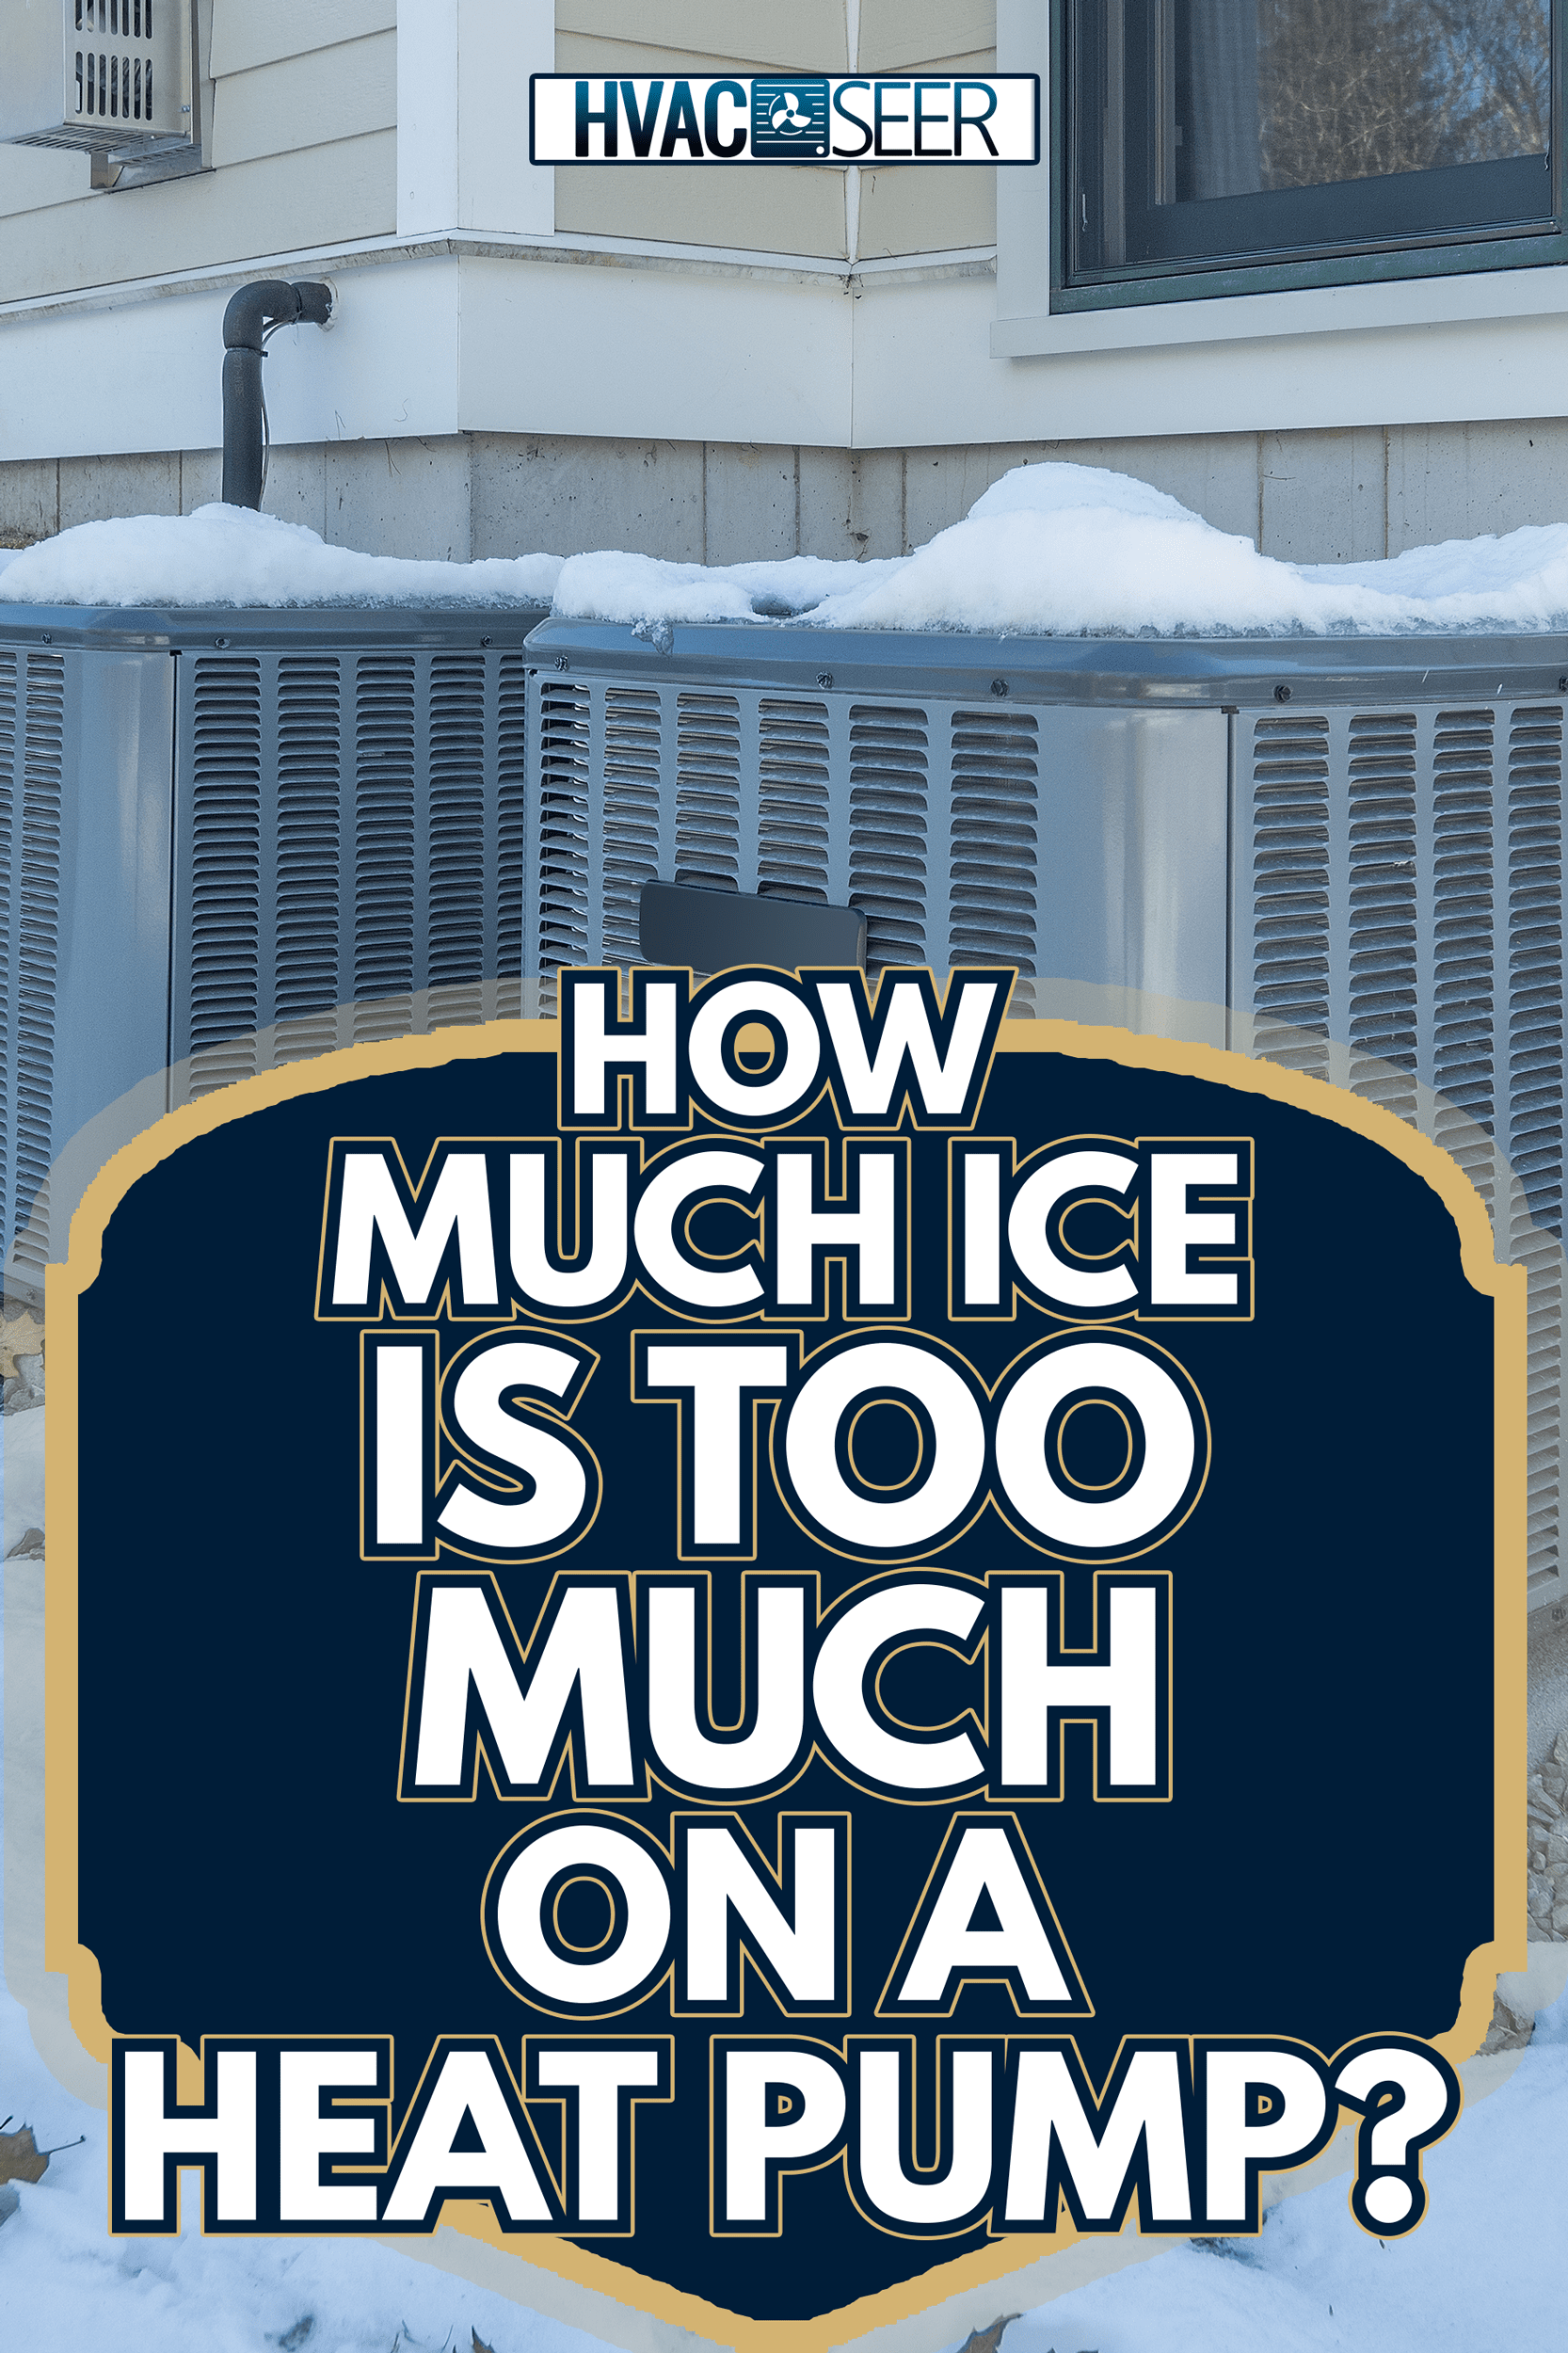 Heating and air conditioning units used to heat and cool a house - How Much Ice Is Too Much On A Heat Pump